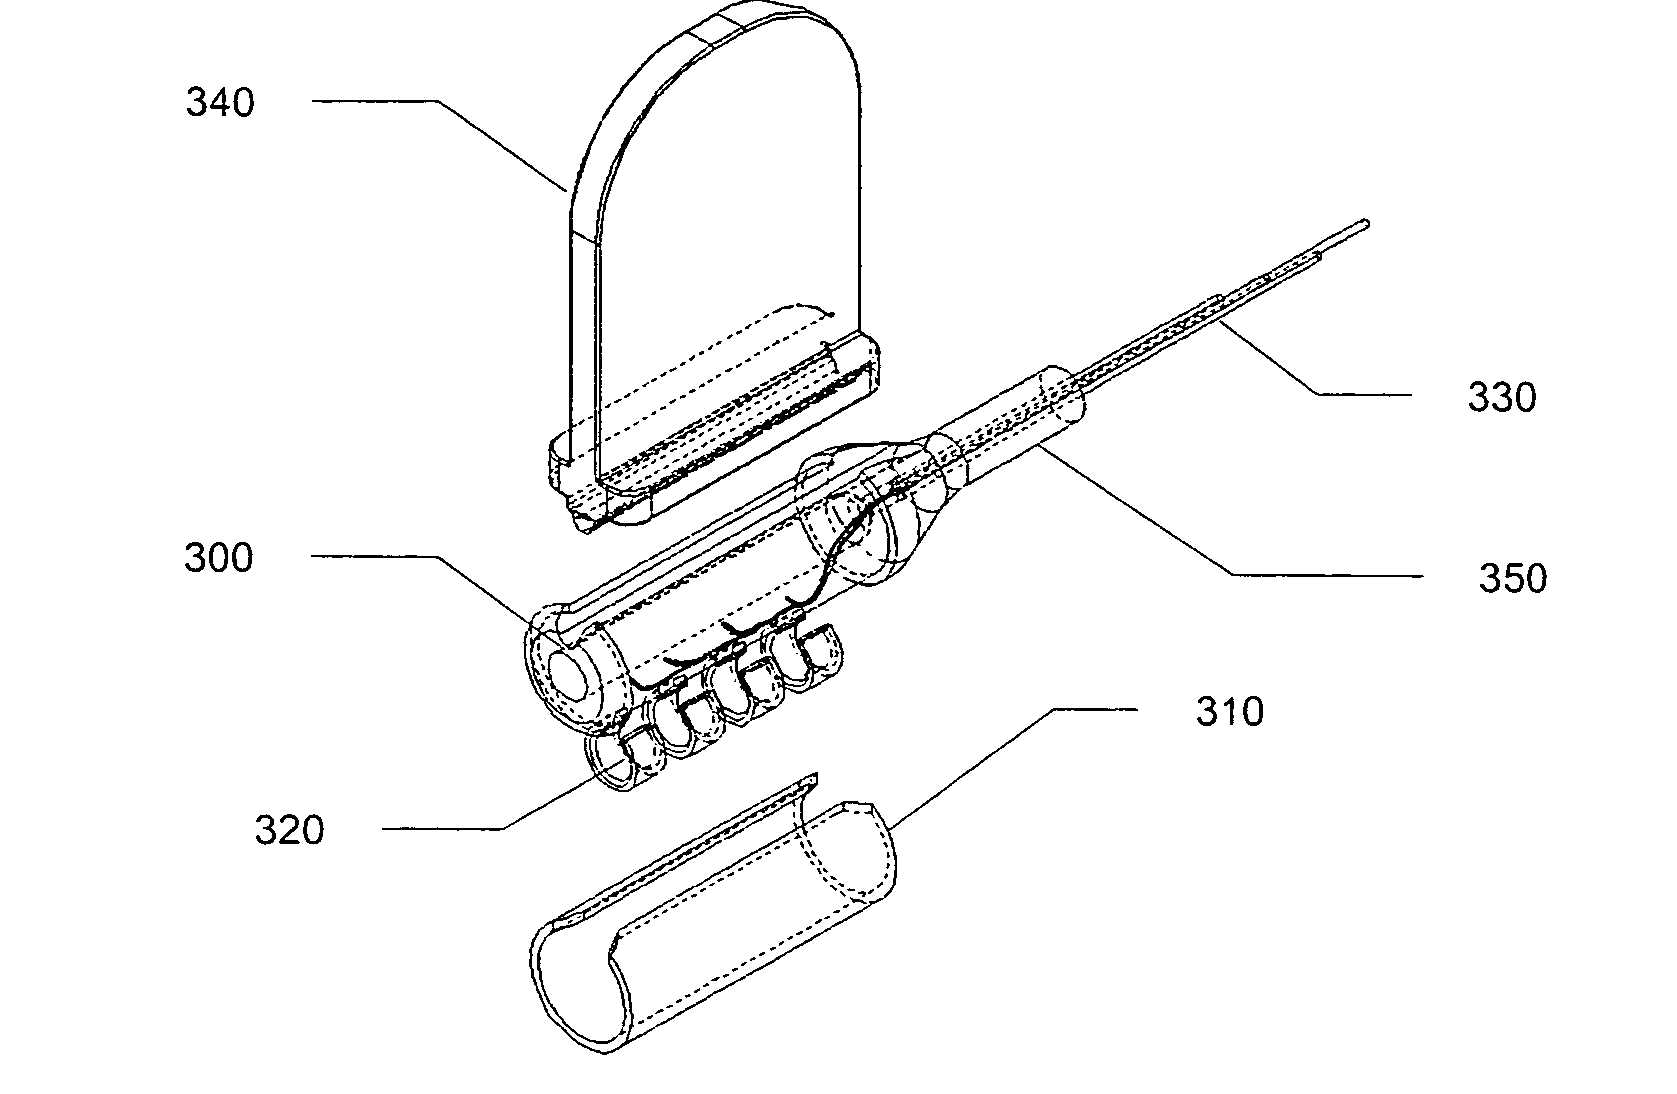 Lead connector, lead adapter, and lead insertion apparatus